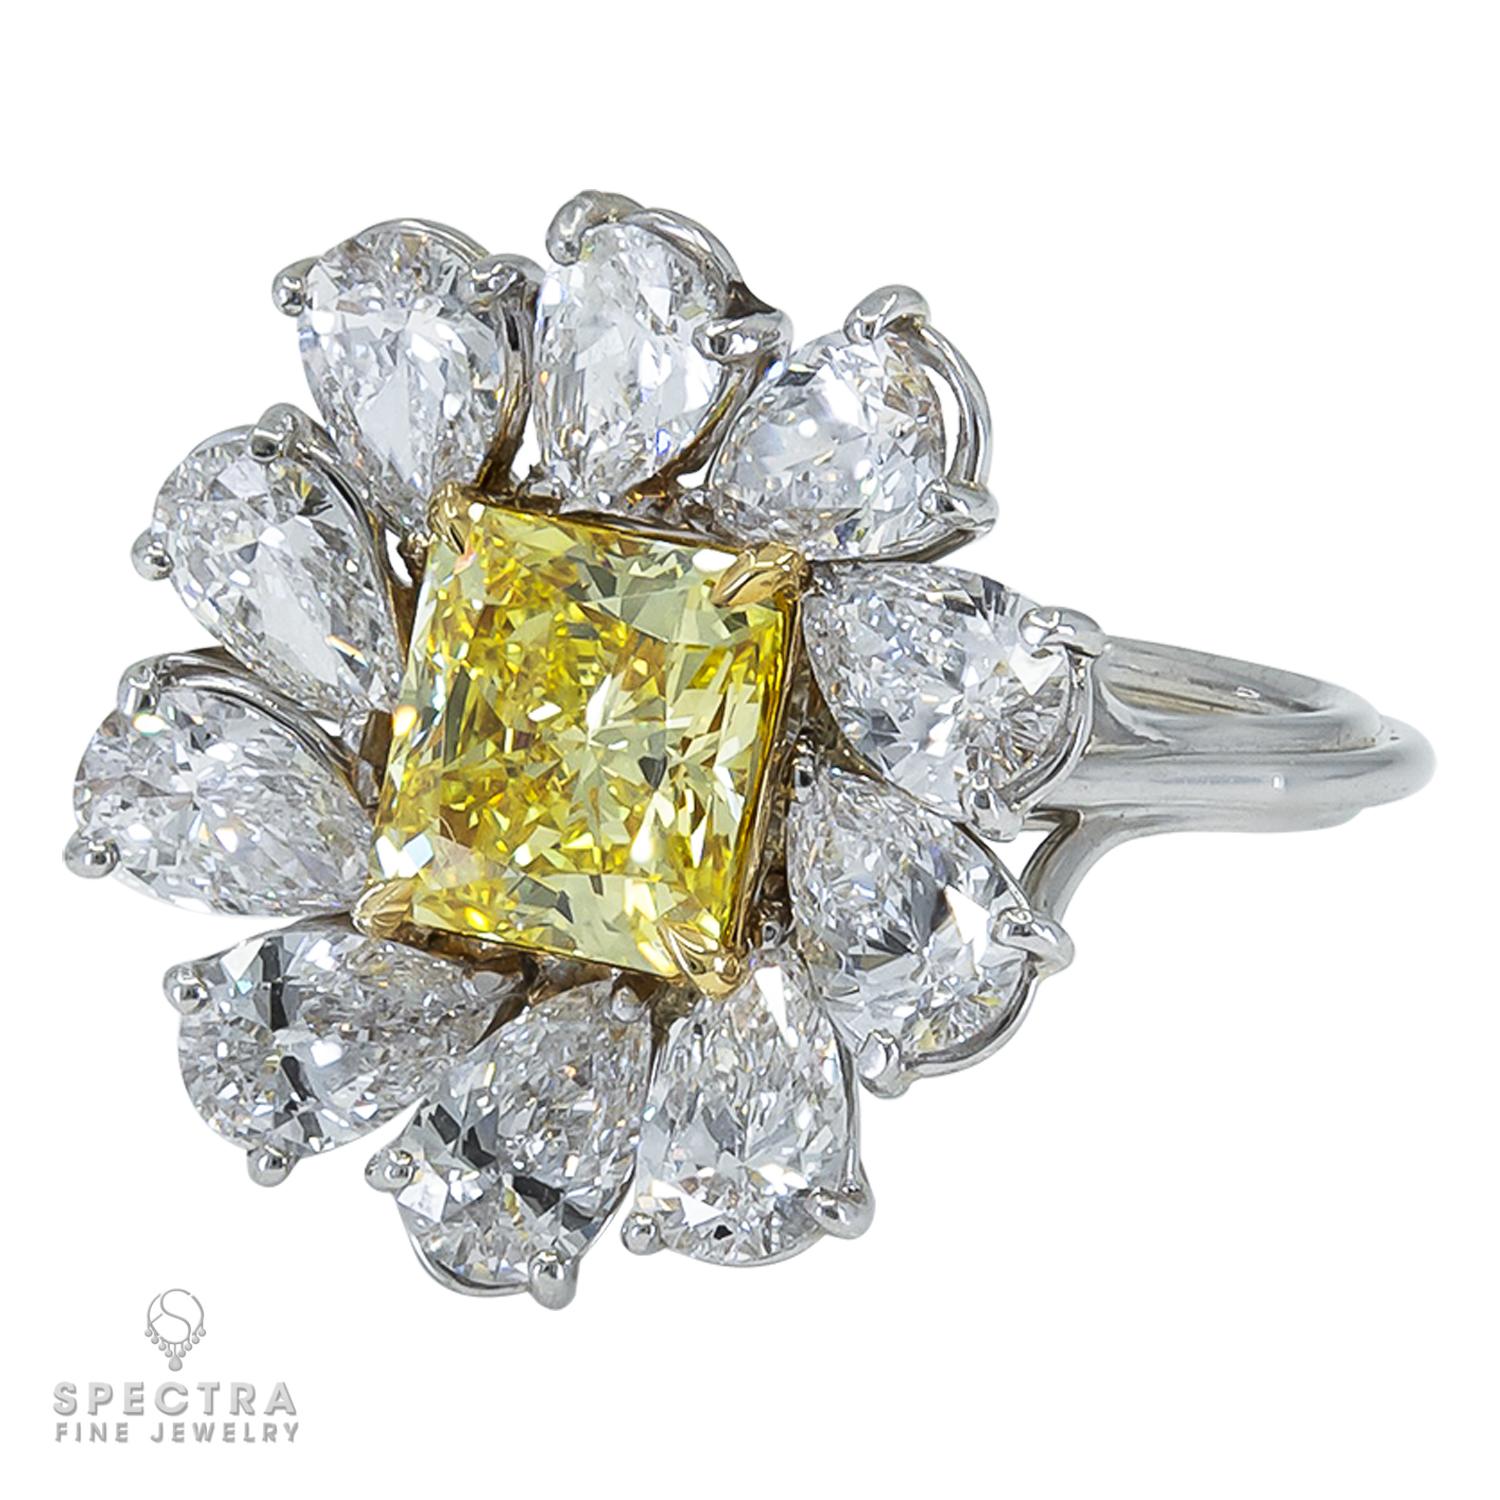 A cocktail ring showcasing a fancy vivid yellow radiant cut diamond weighing a total of 1.47 carats, VVS1 clarity.
The diamond is certified by GIA. 
The center stone is accented with 10 pear shape diamonds, G-H color, VS clarity.
Metal is platinum